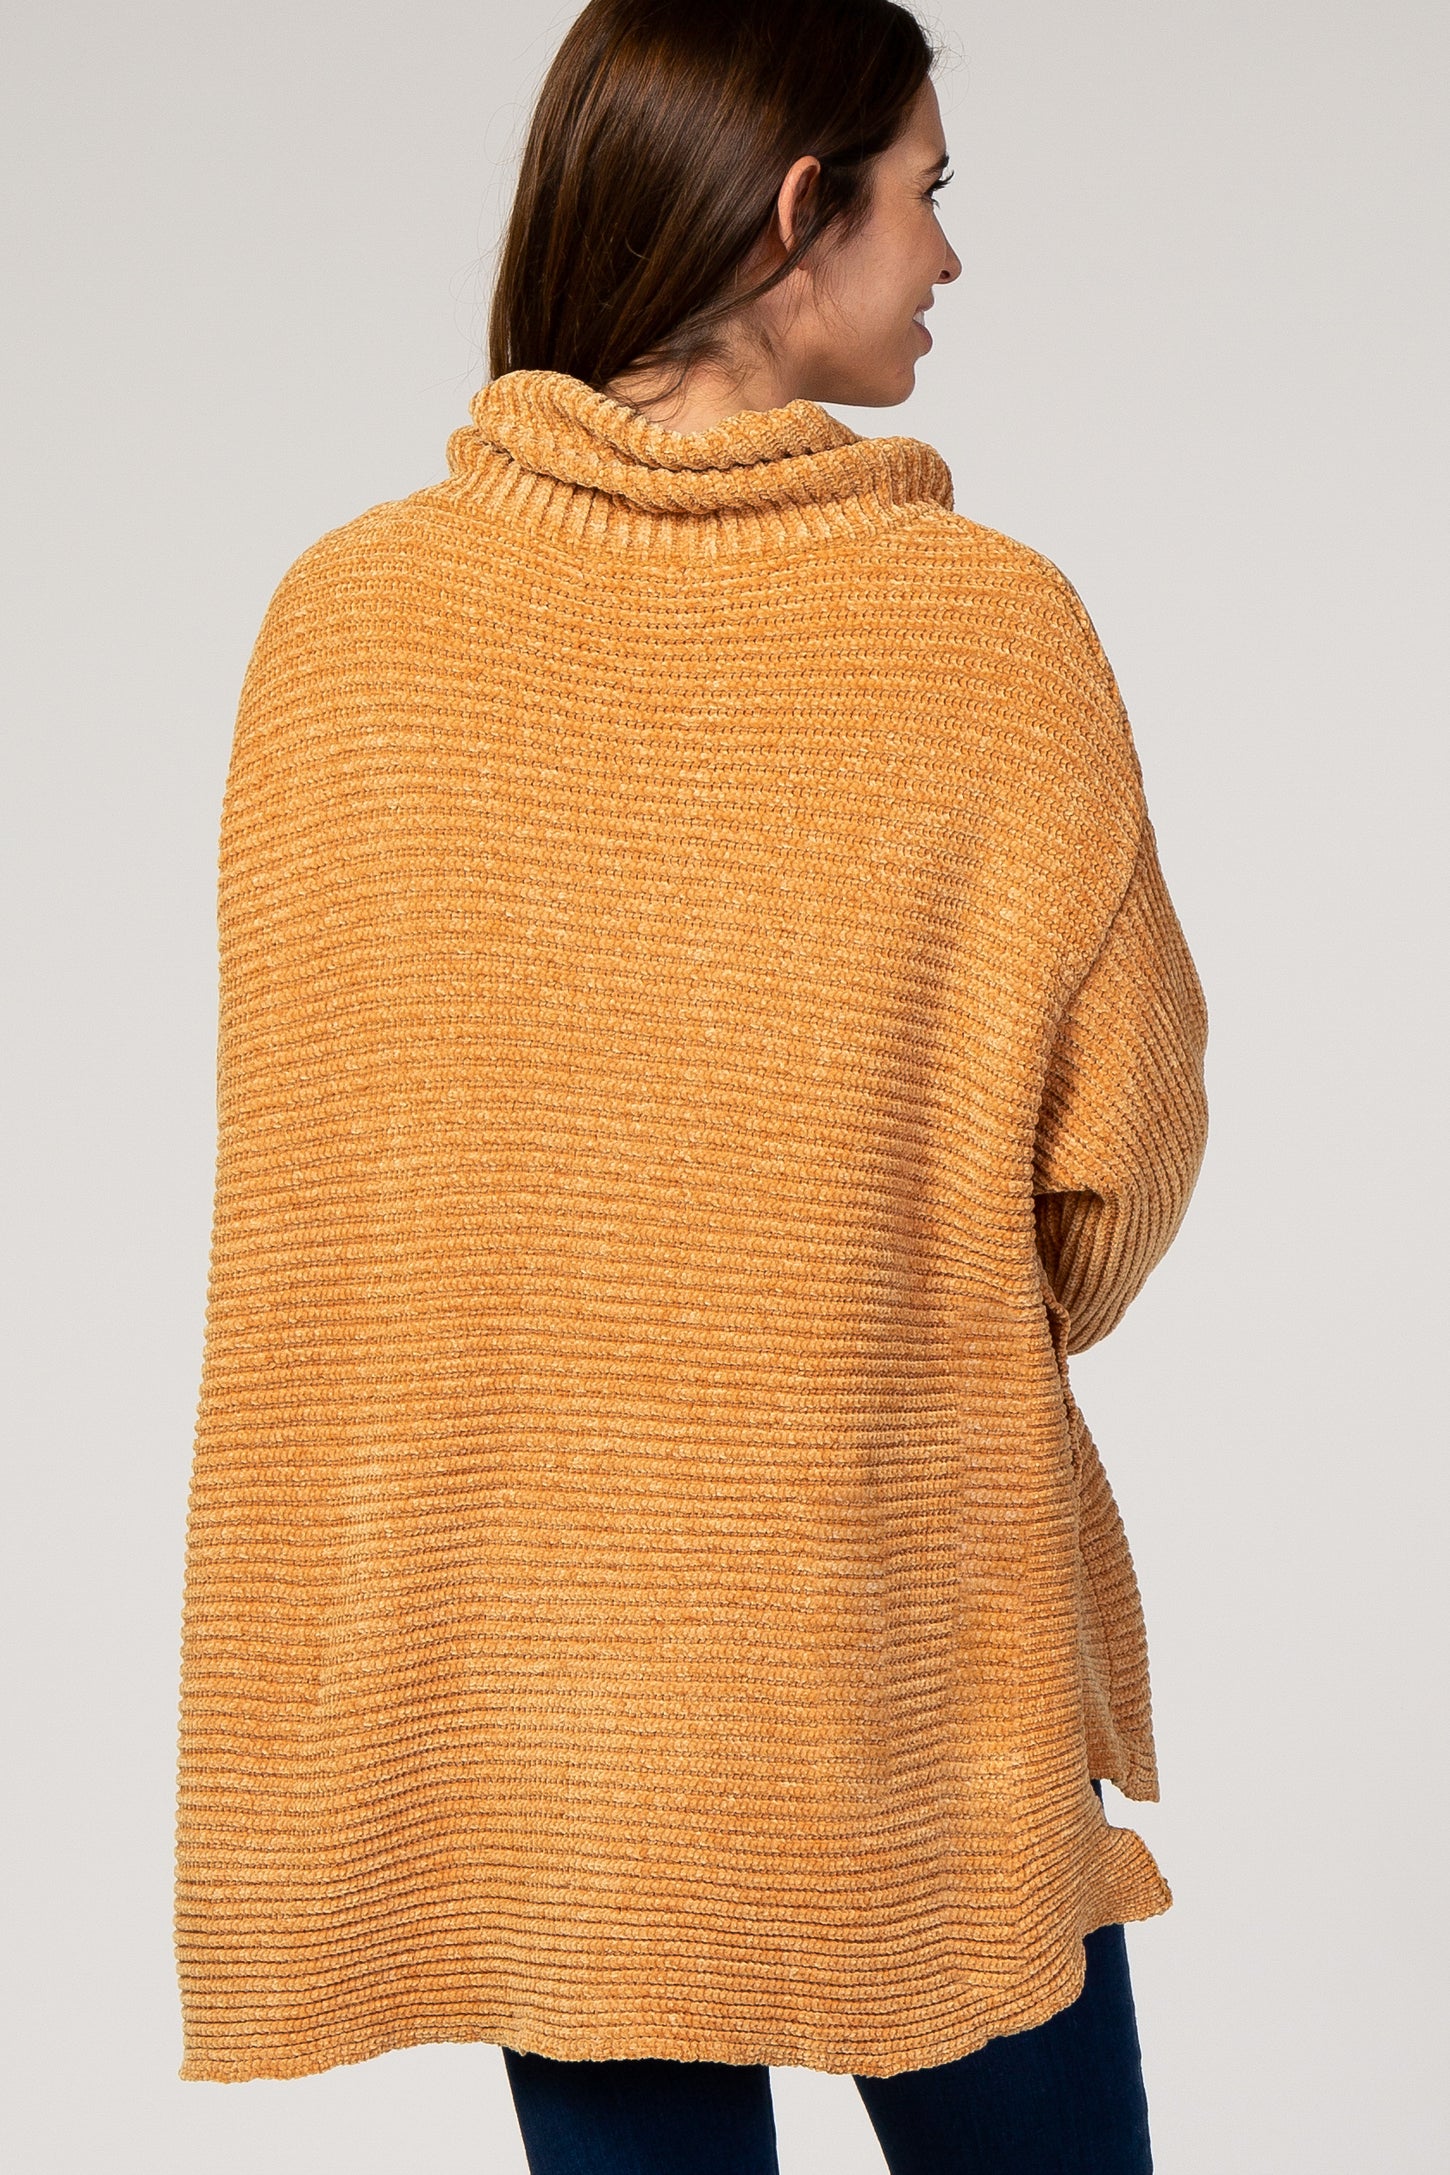 Mustard Chenille Ribbed Poncho Maternity Sweater